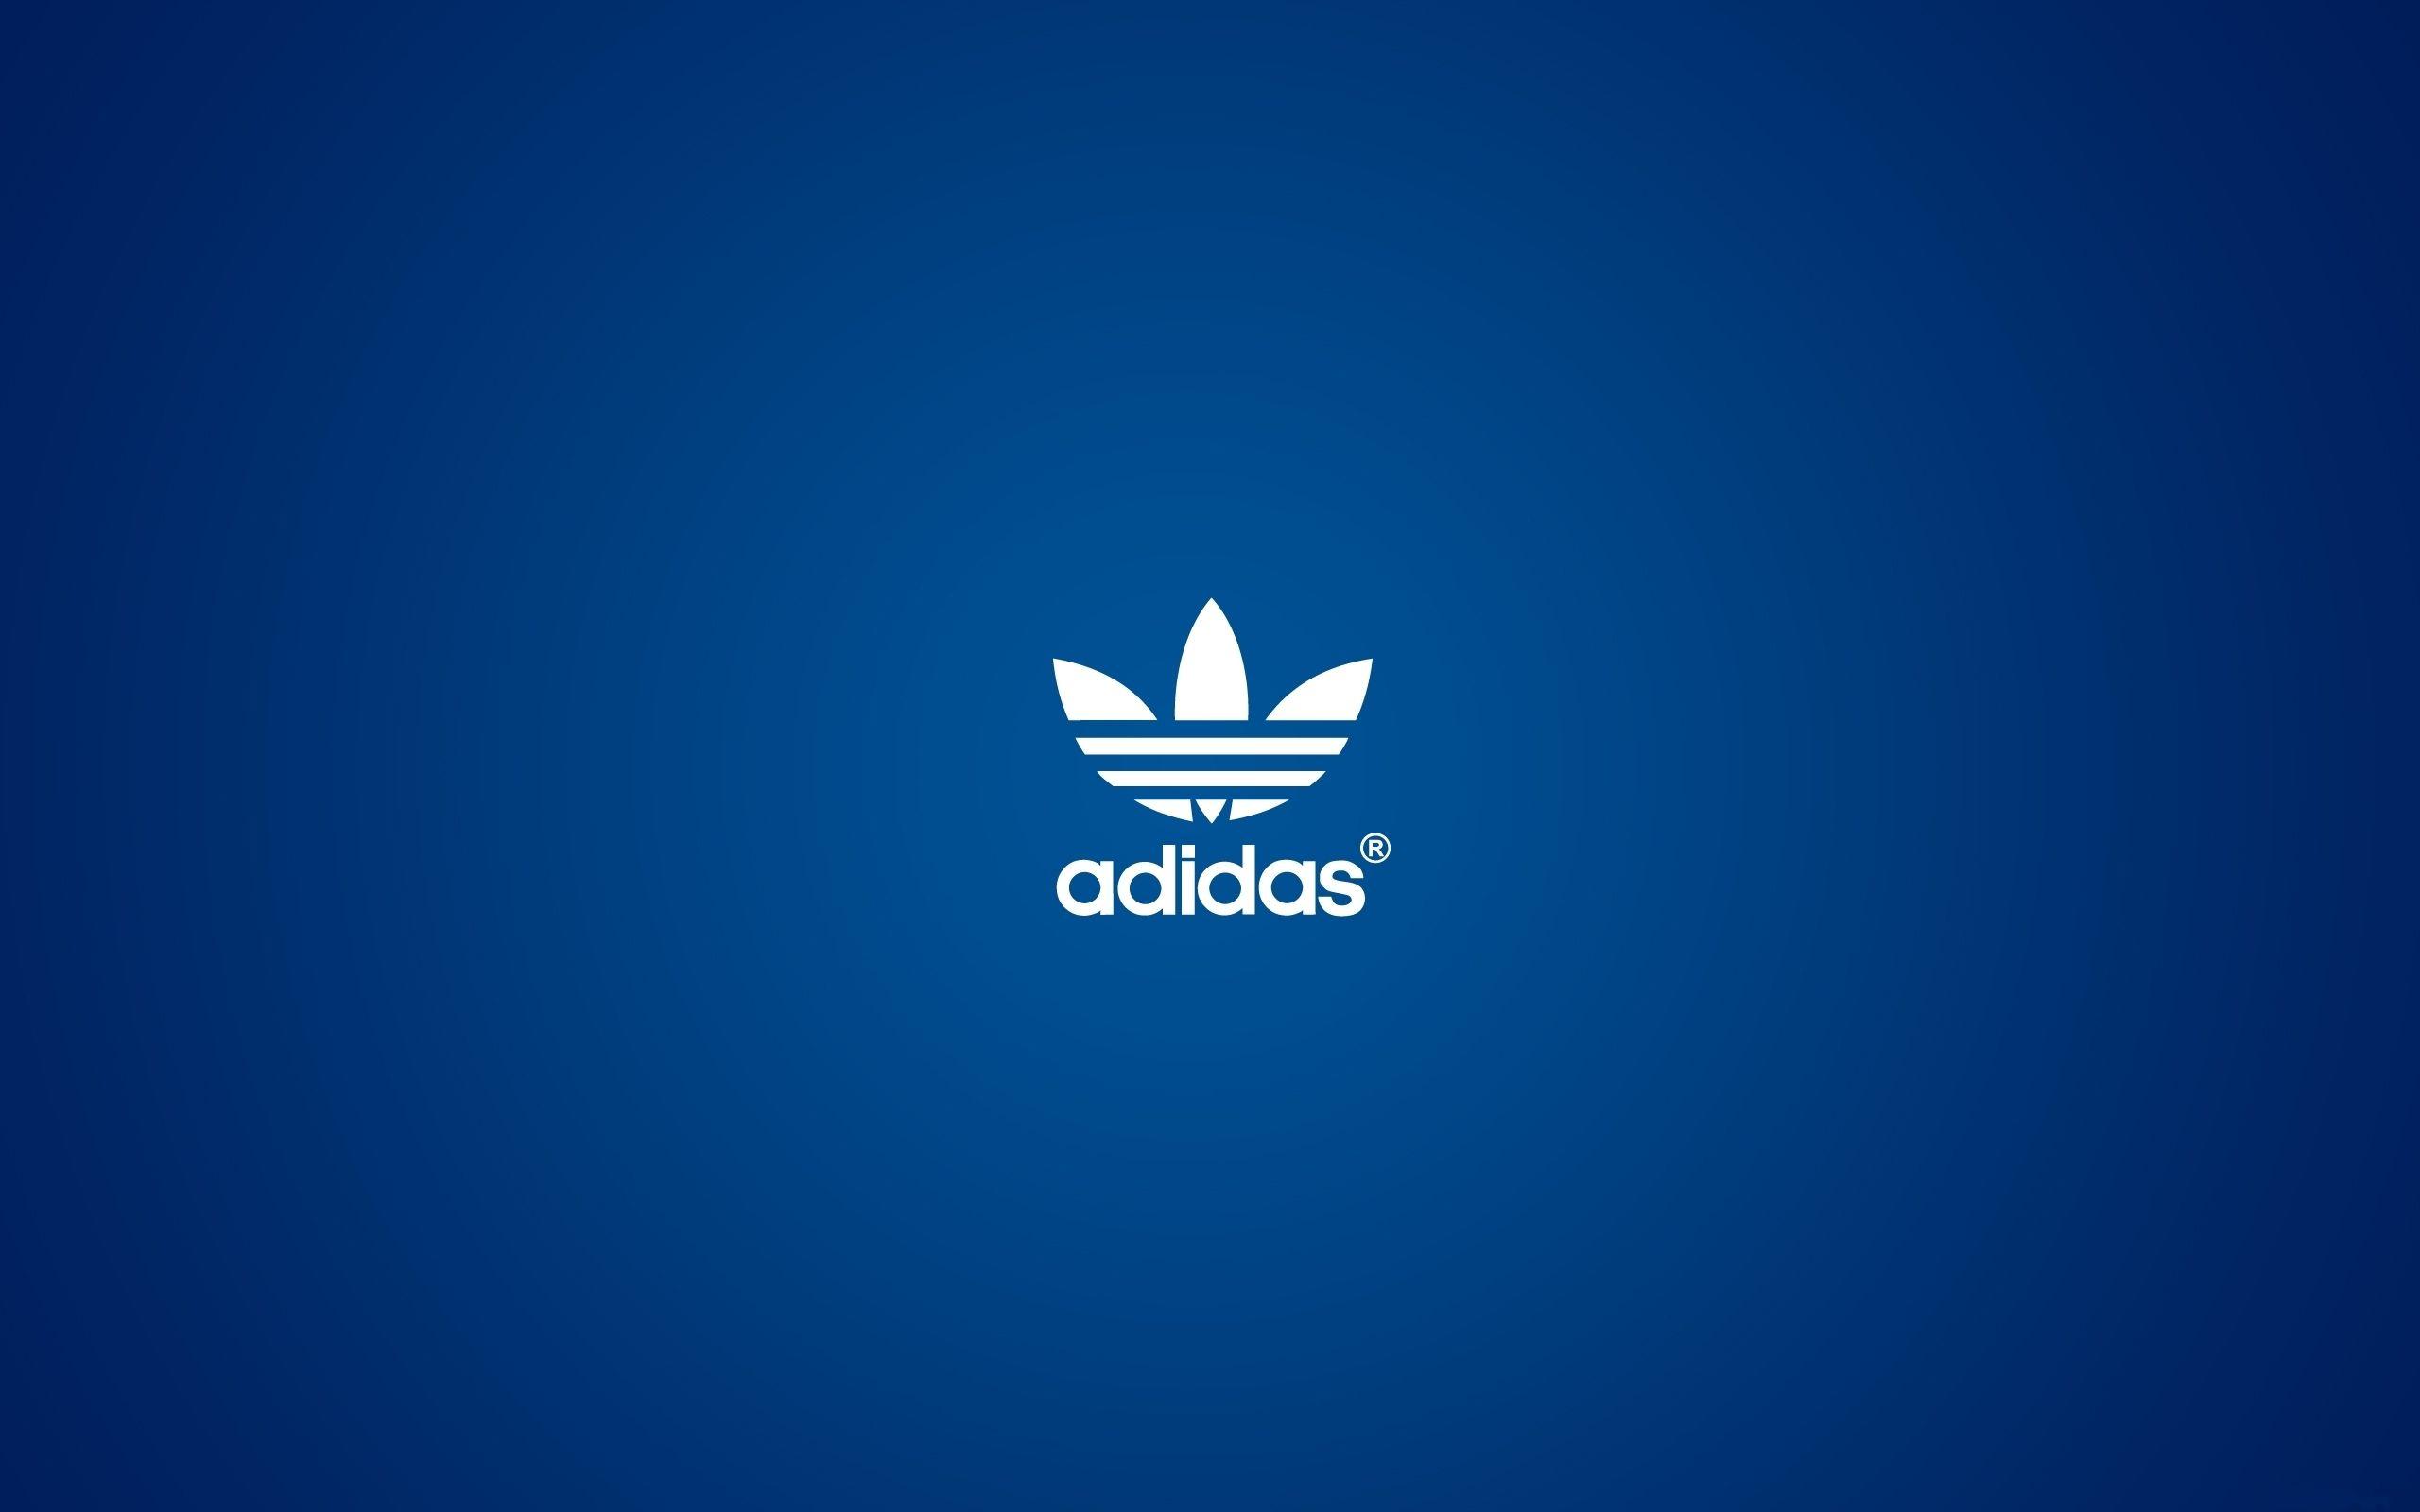 17 Best image about adidas